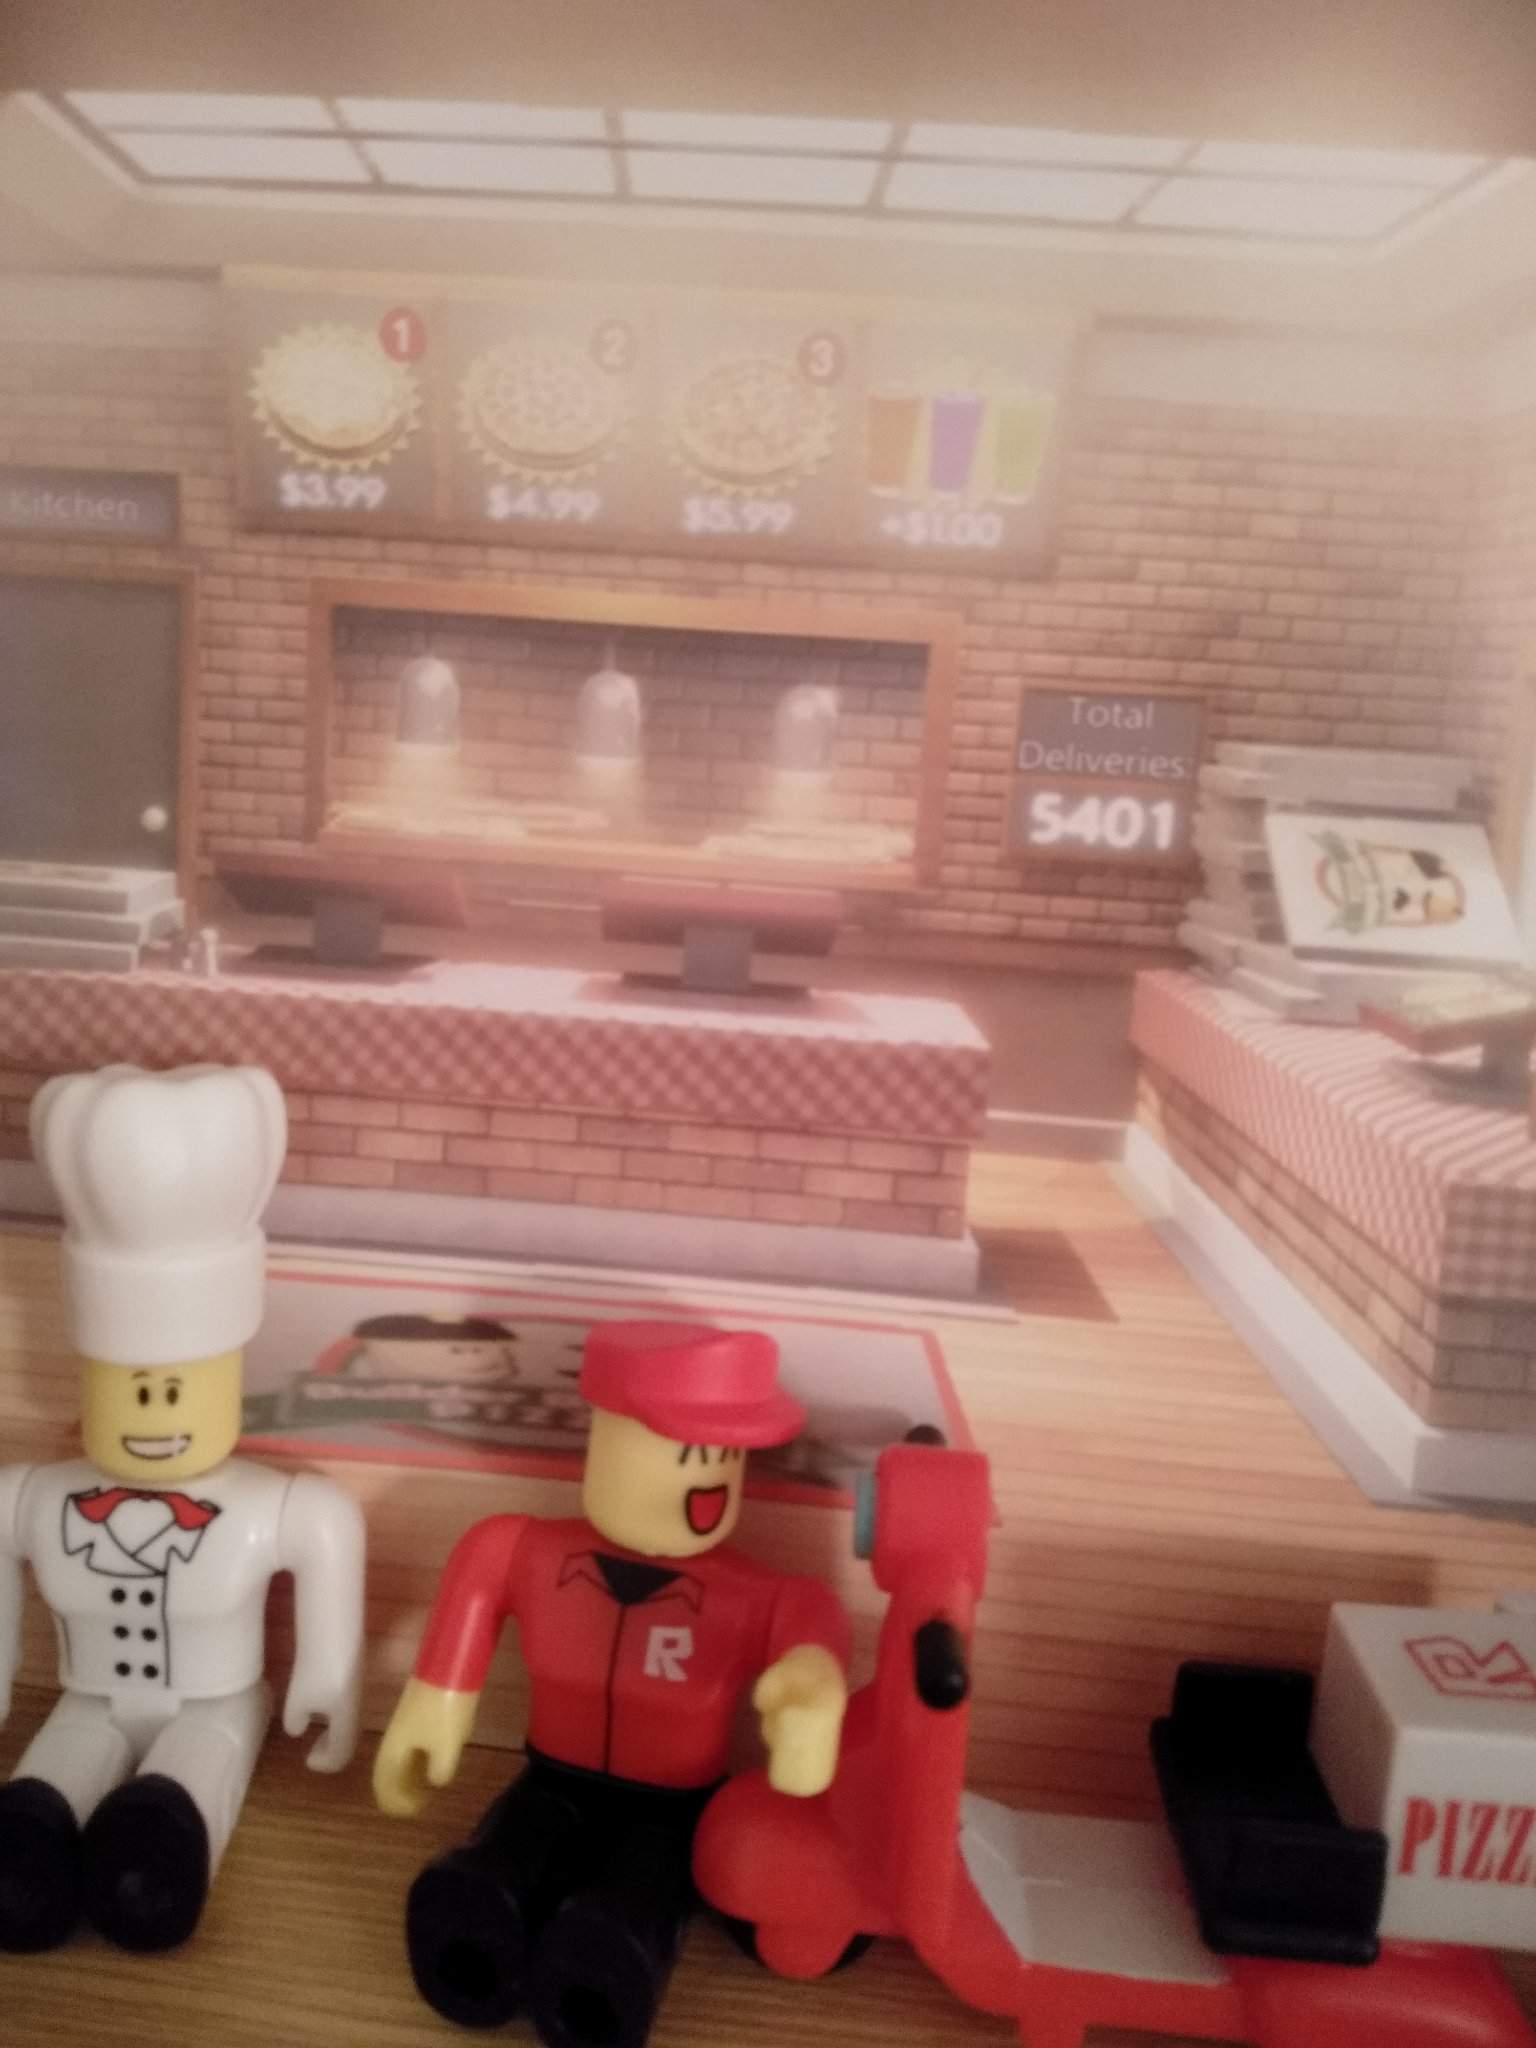 Work At A Pizza Place Toys Roblox Amino